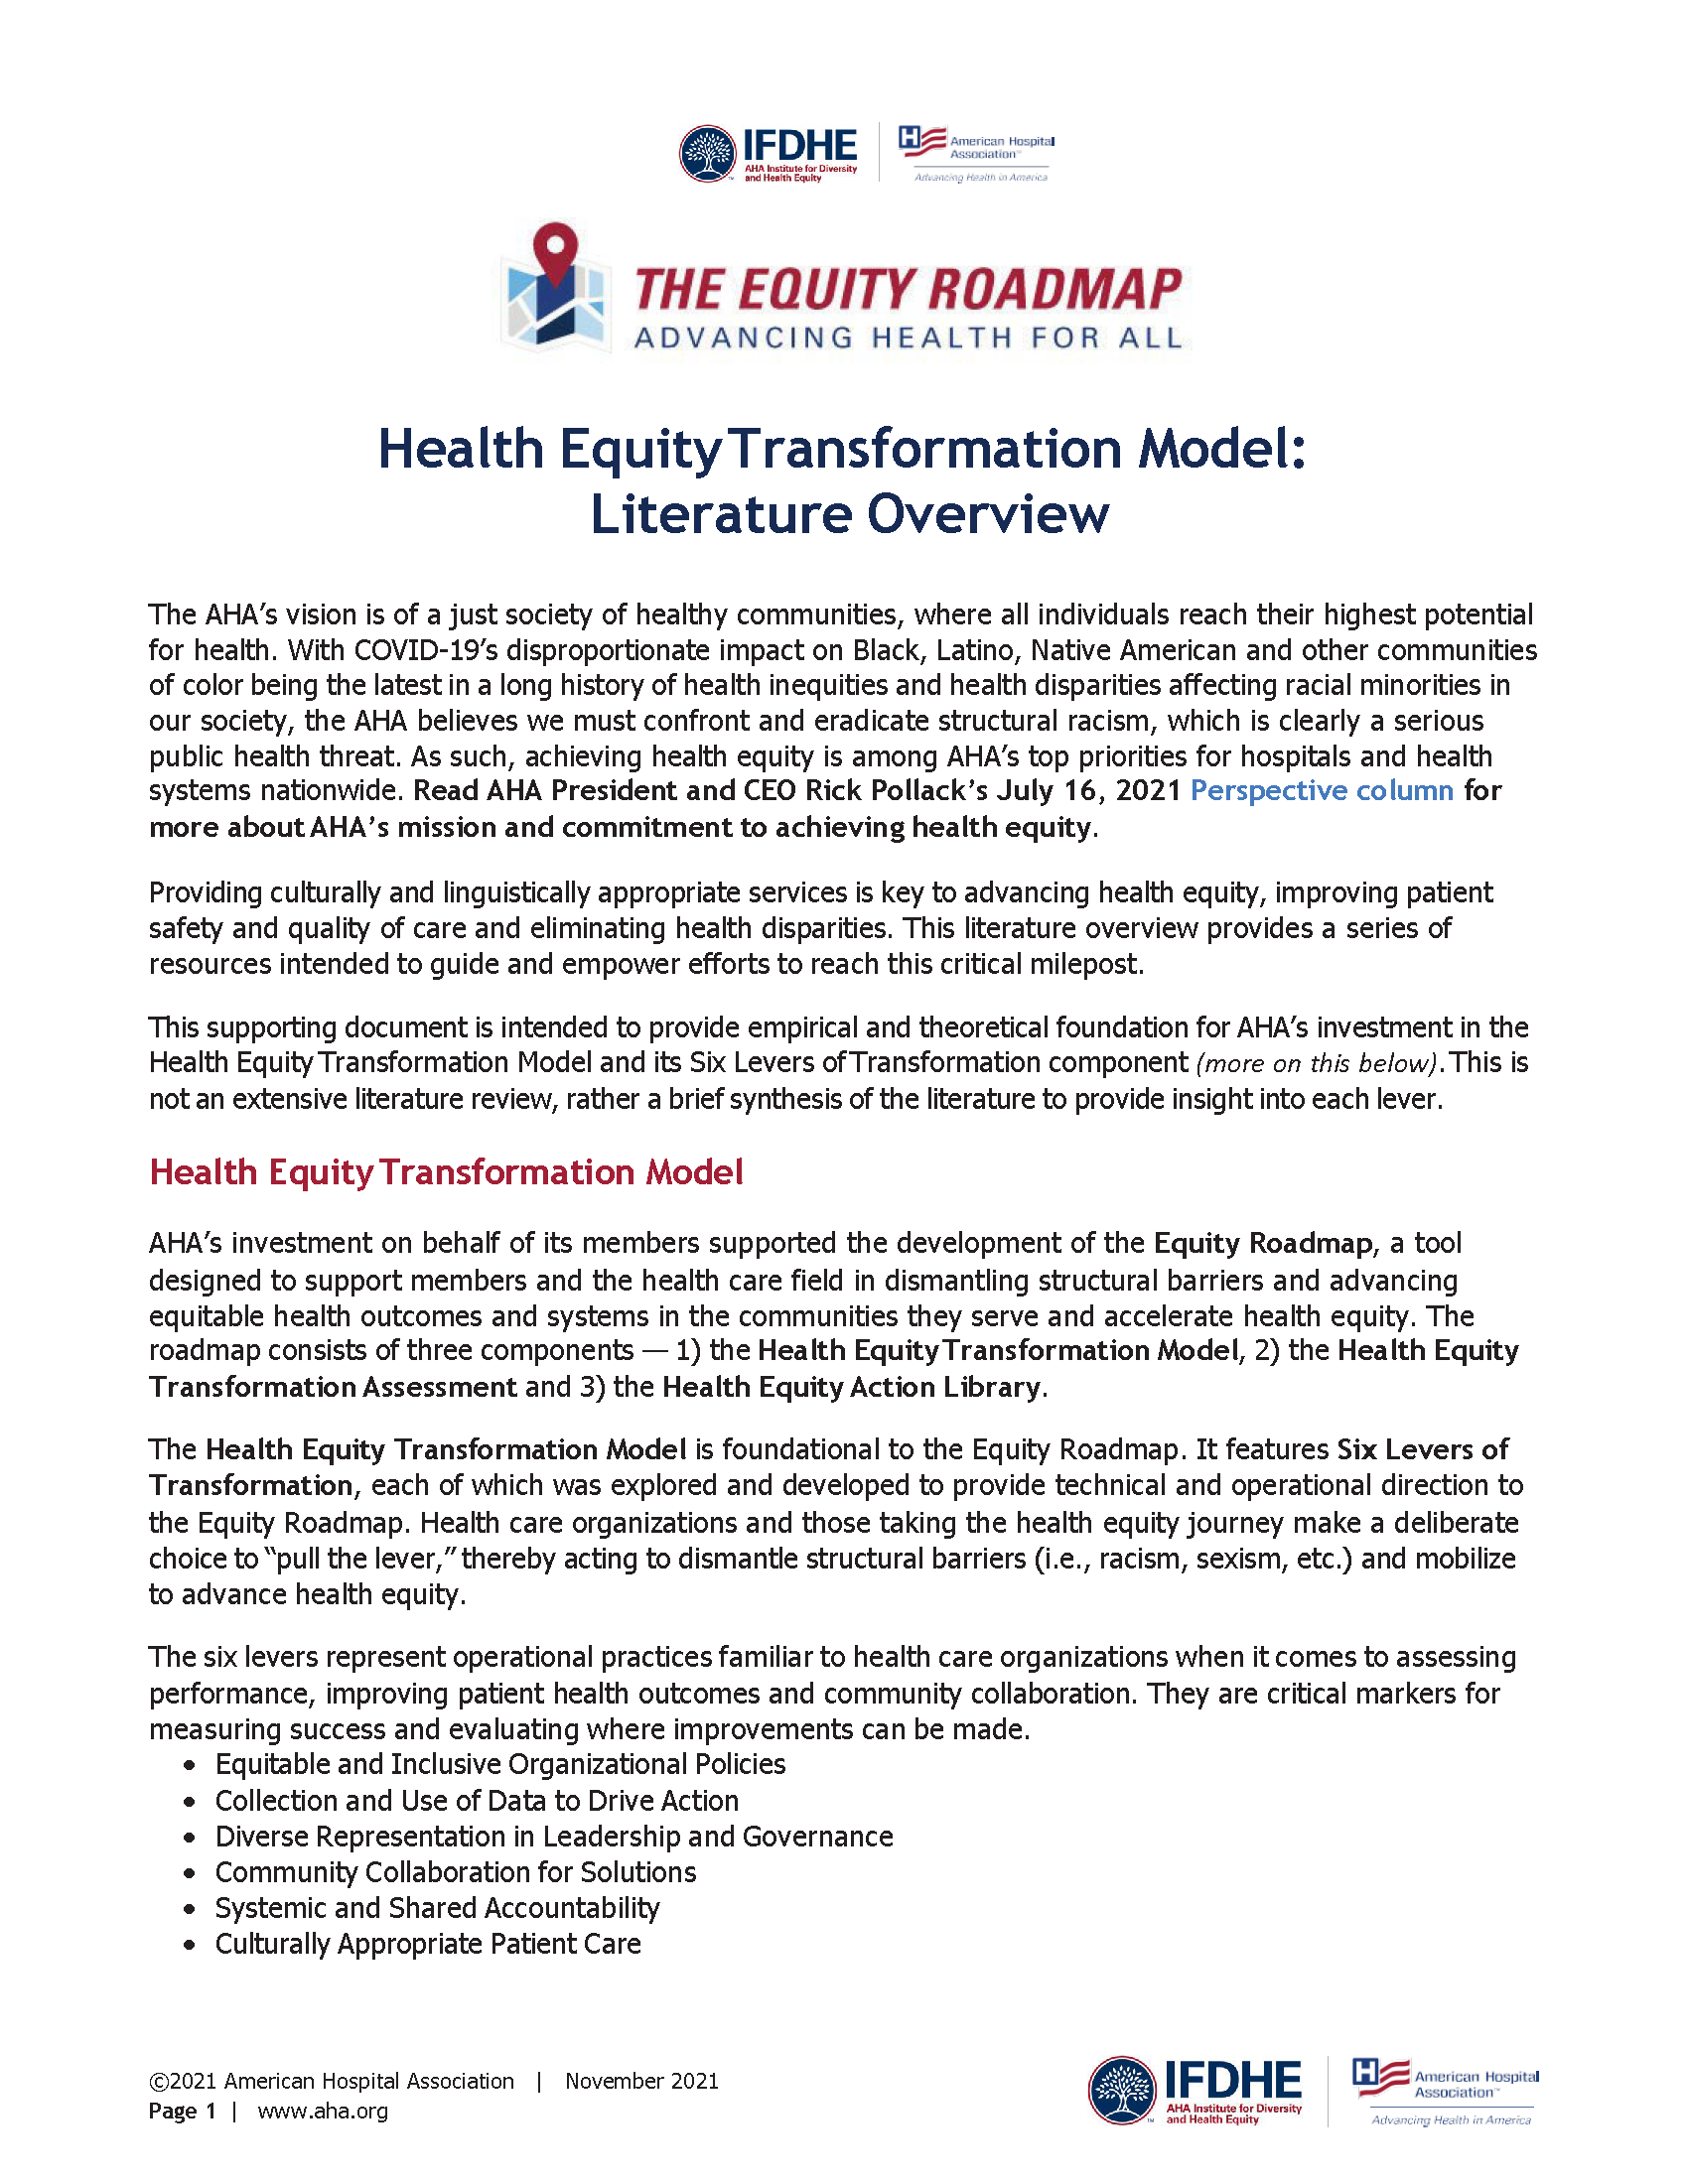 Health Equity Transformation Model: Literature Overview page 1.